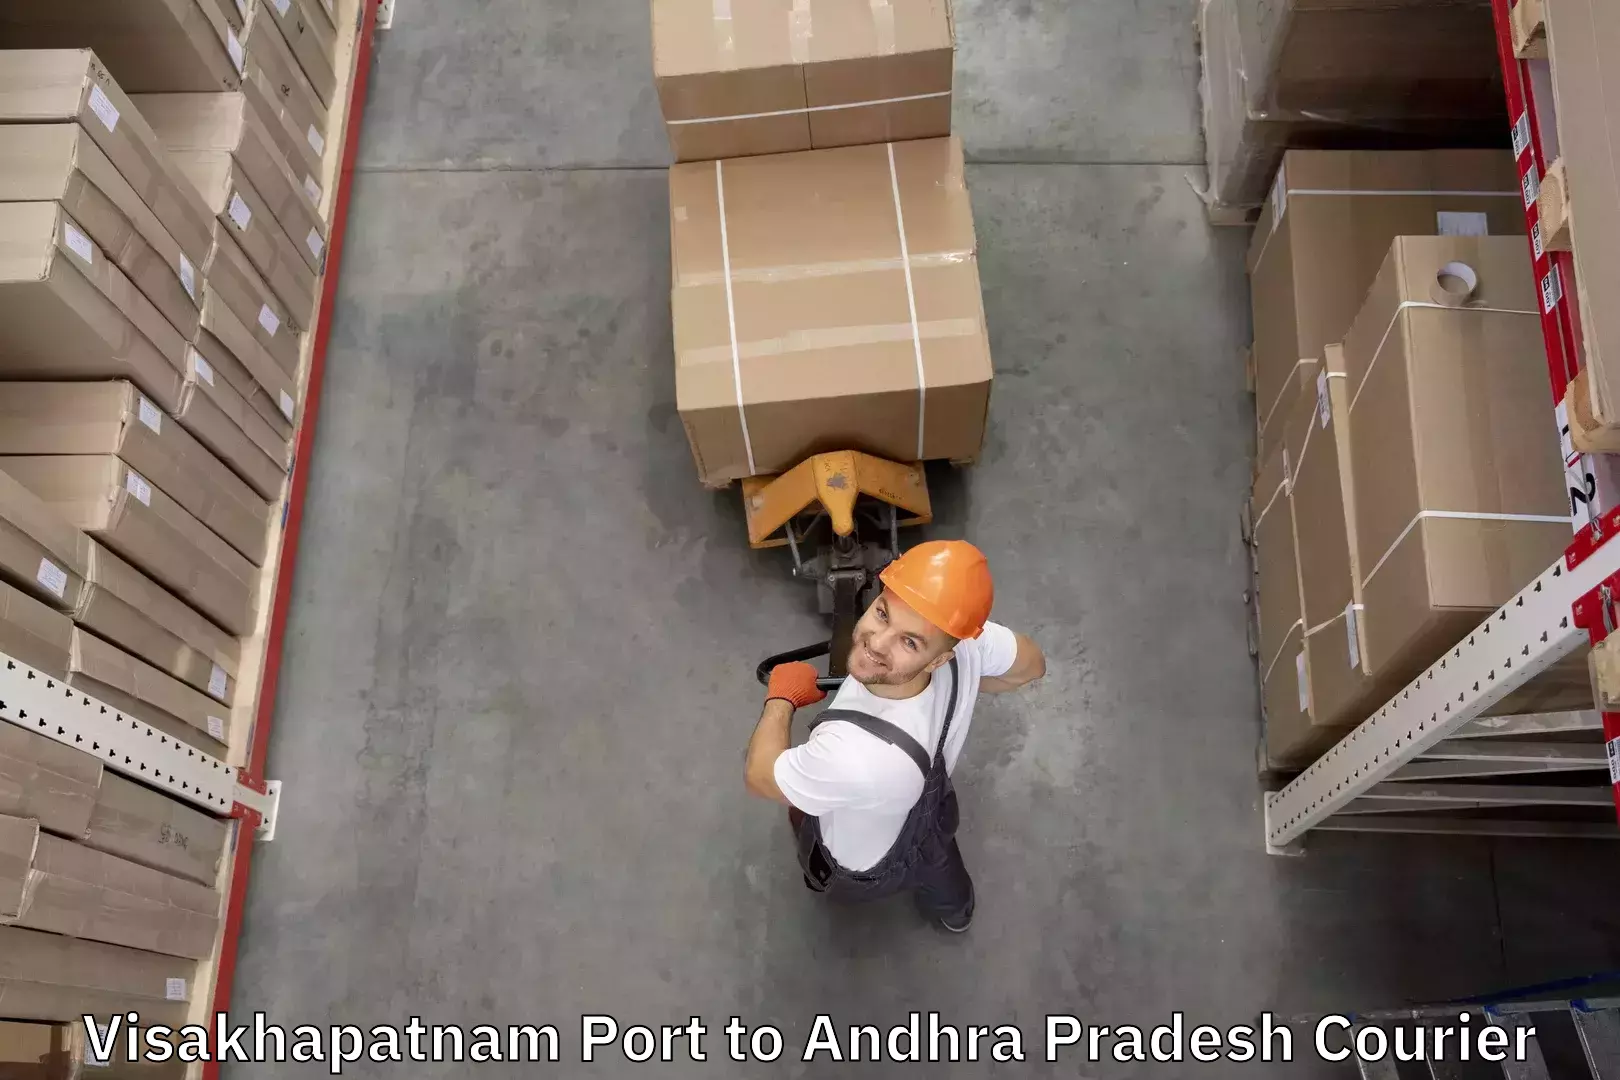 Baggage shipping service in Visakhapatnam Port to Gudur